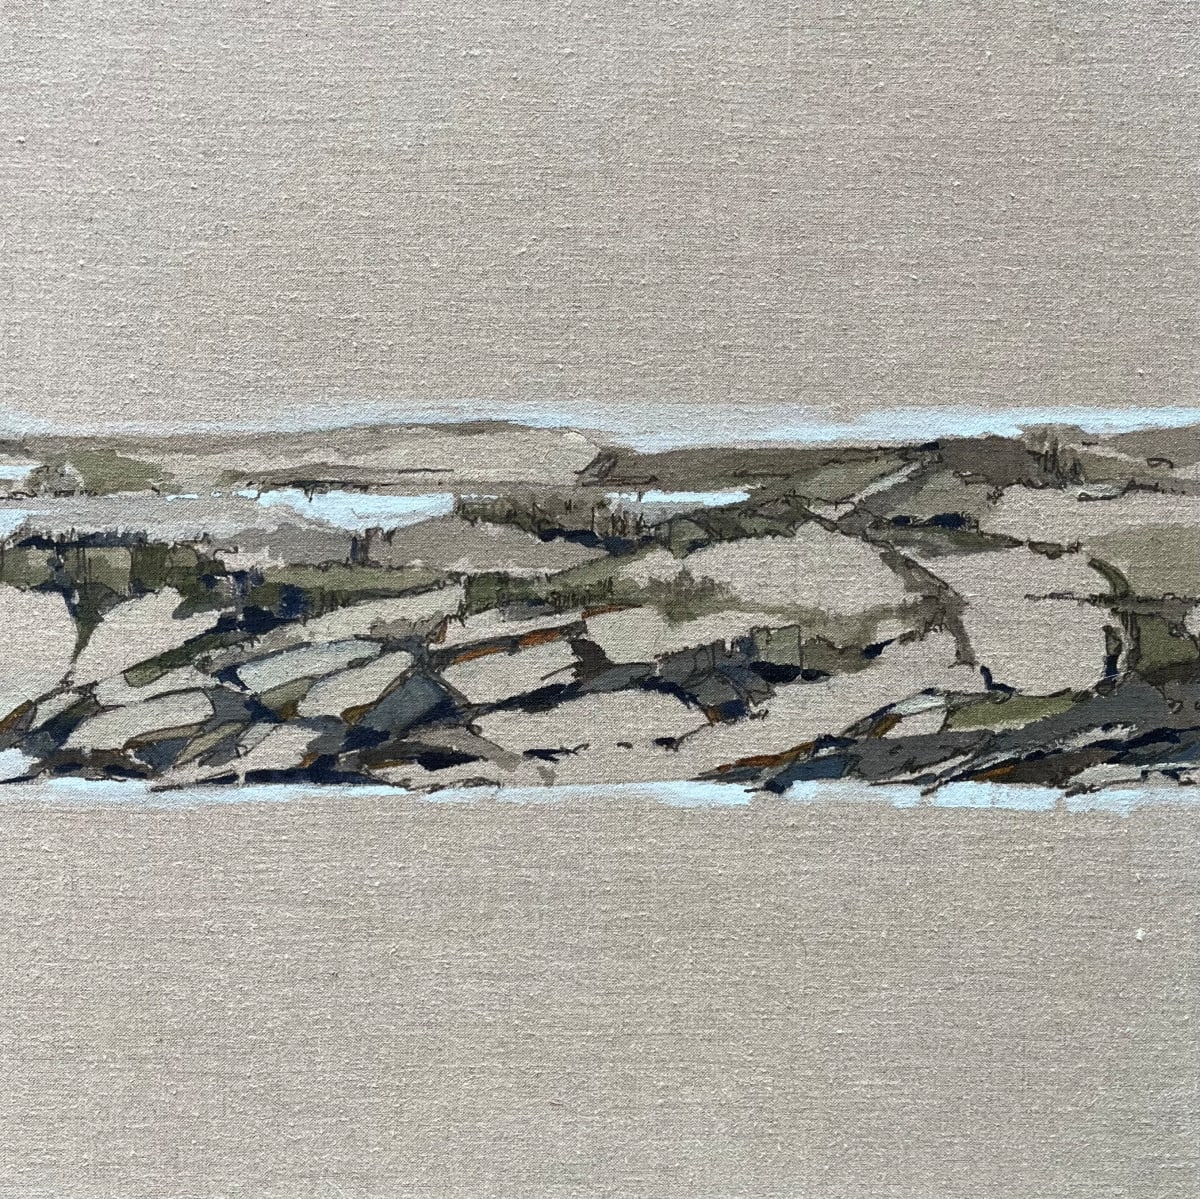 Ponds, No.3  (Sequential) by Barbara Houston  Image: Pond No.3, available individually or as a quadriptych